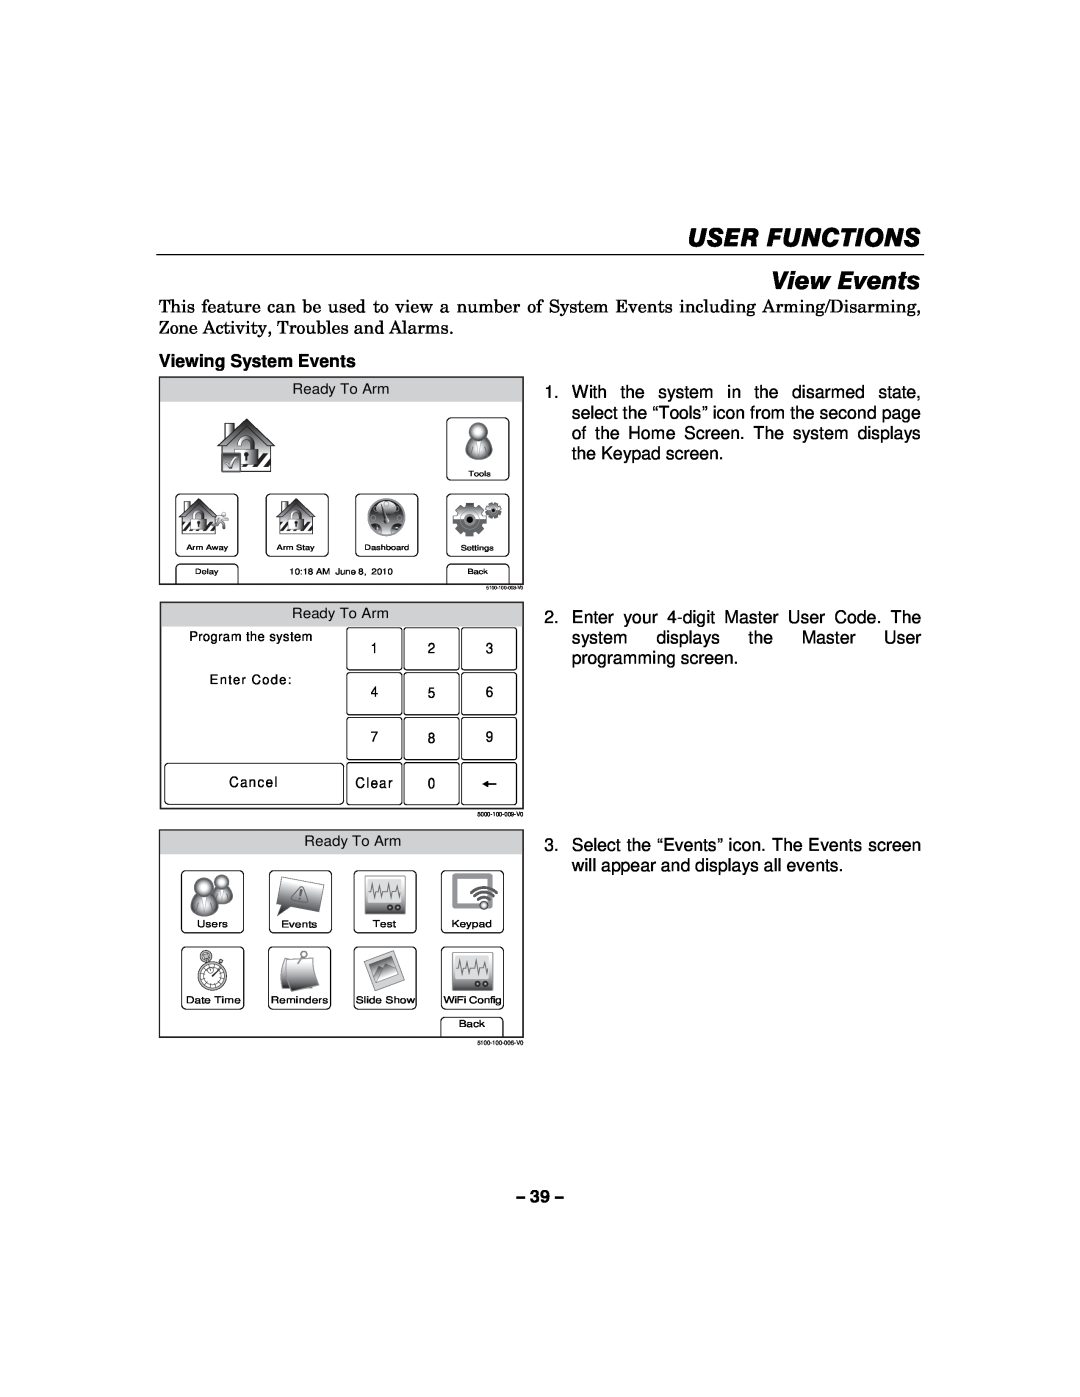 Honeywell L5100 manual USER FUNCTIONS View Events, Viewing System Events 